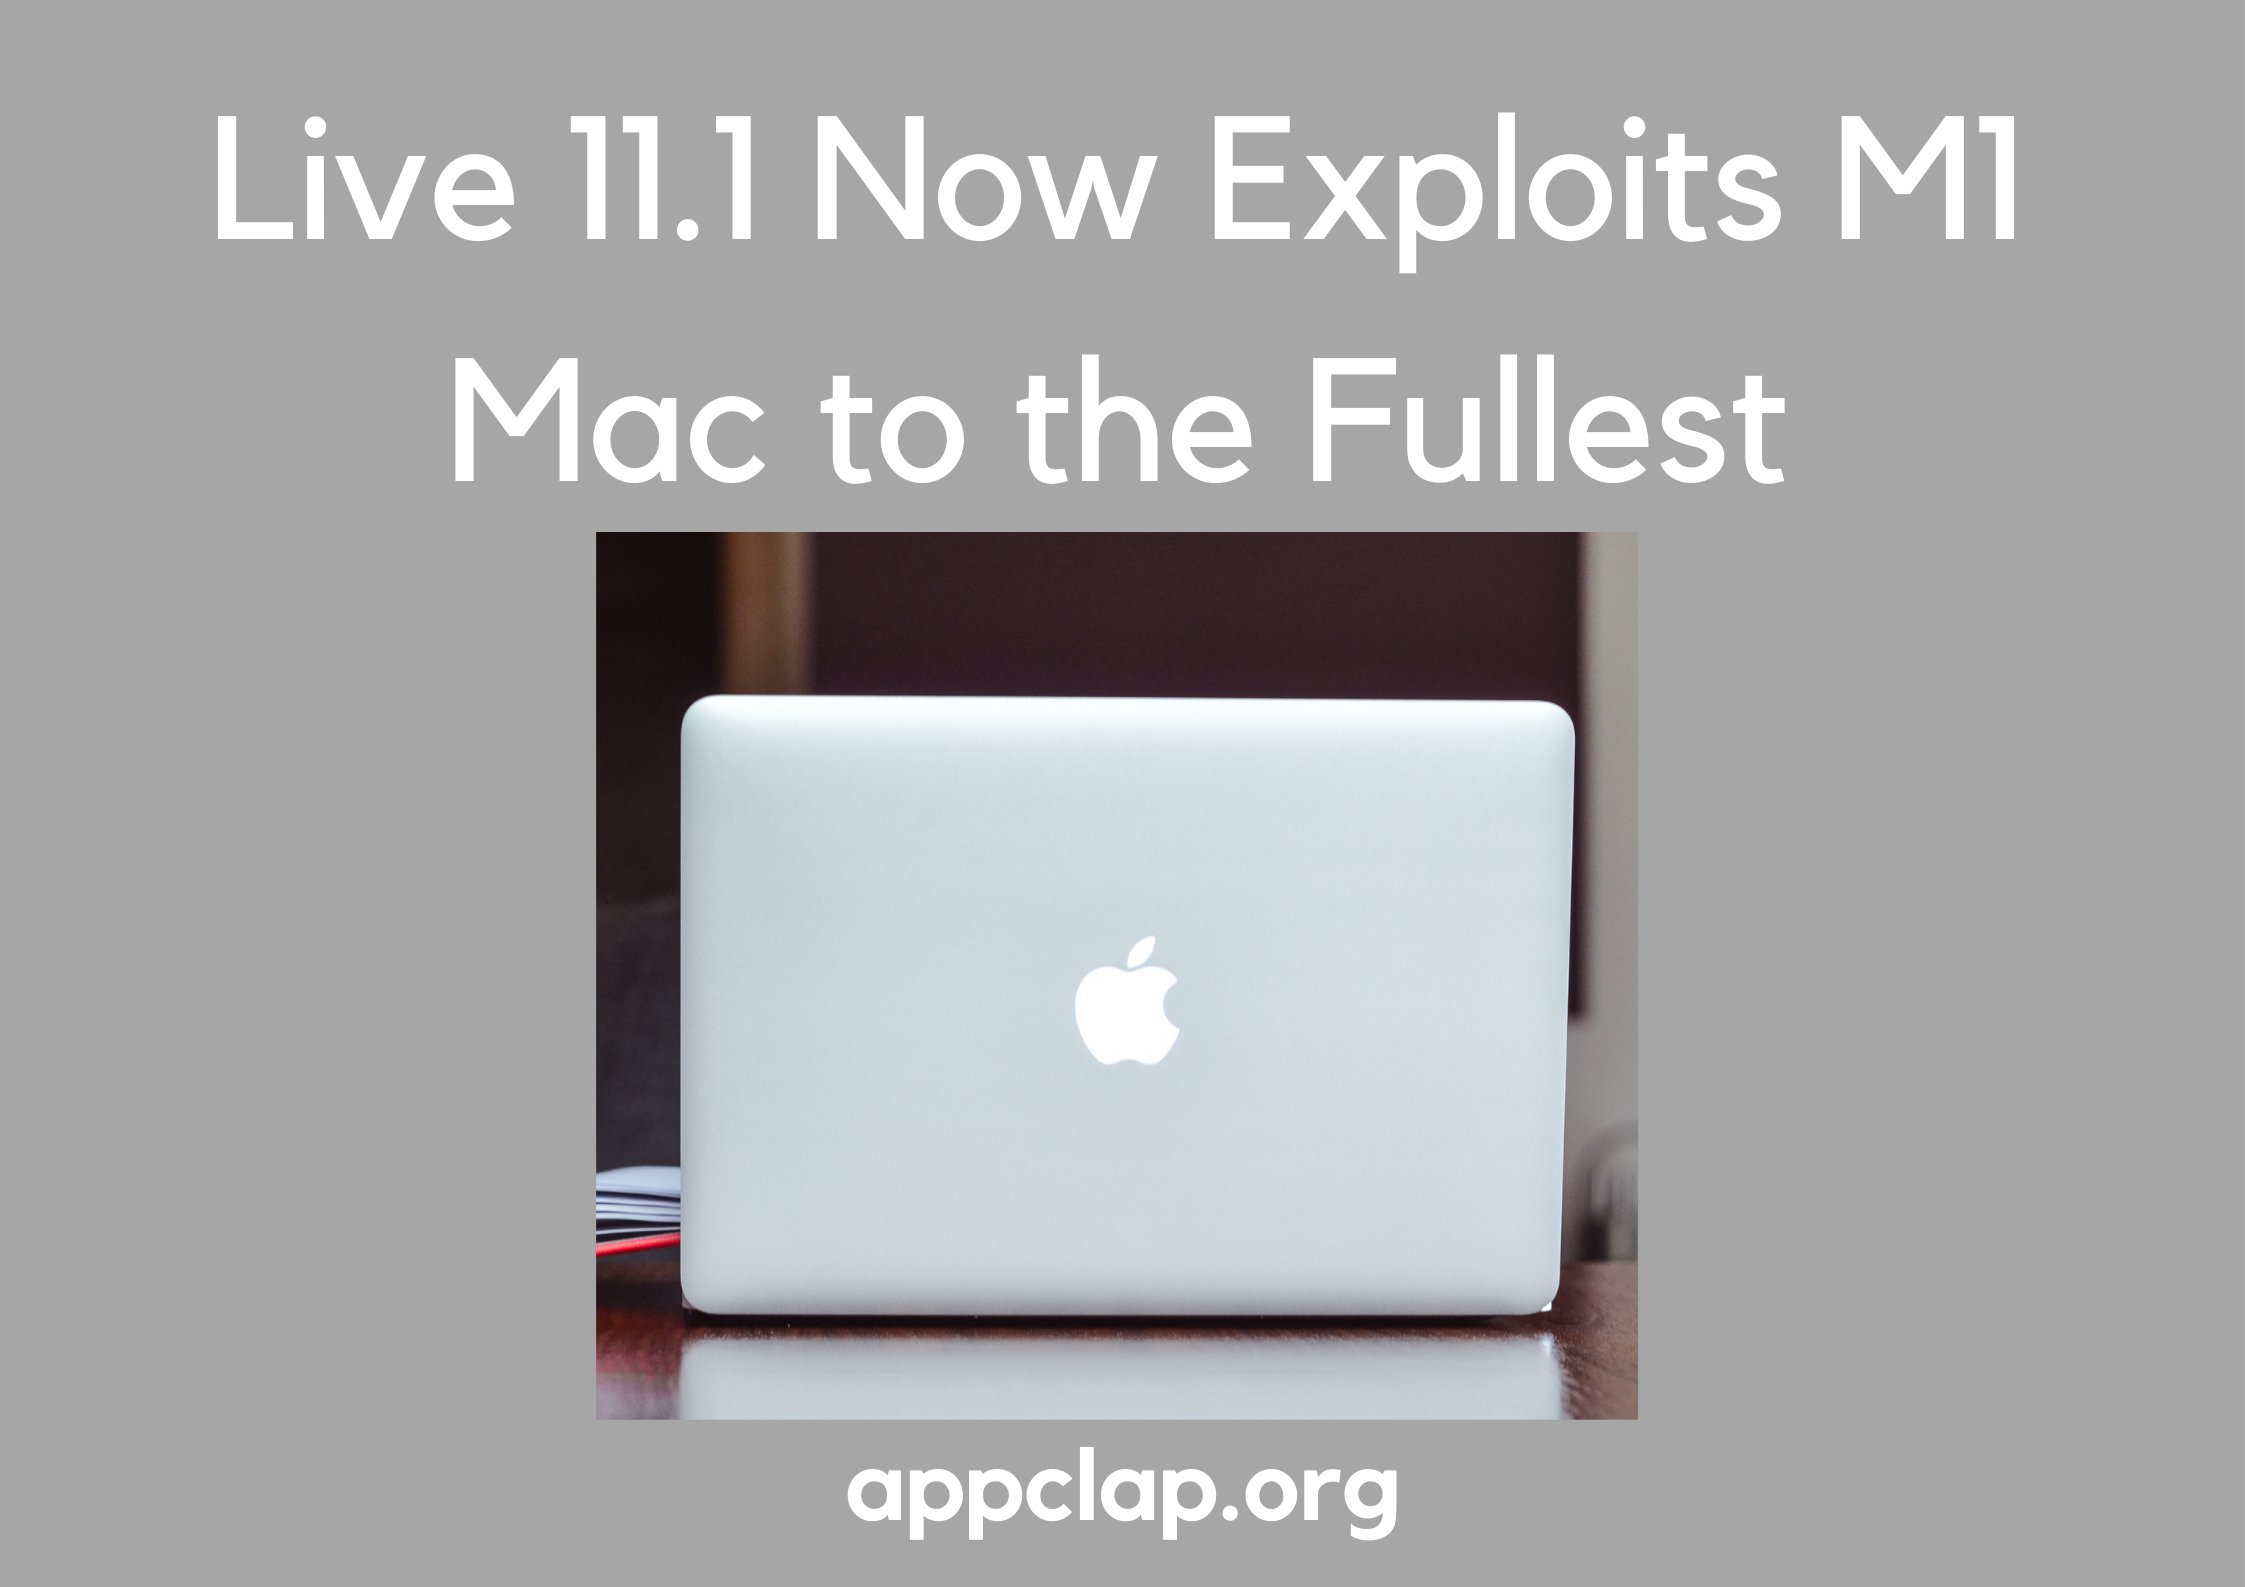 Live 11.1 Now Exploits M1 Mac to the Fullest